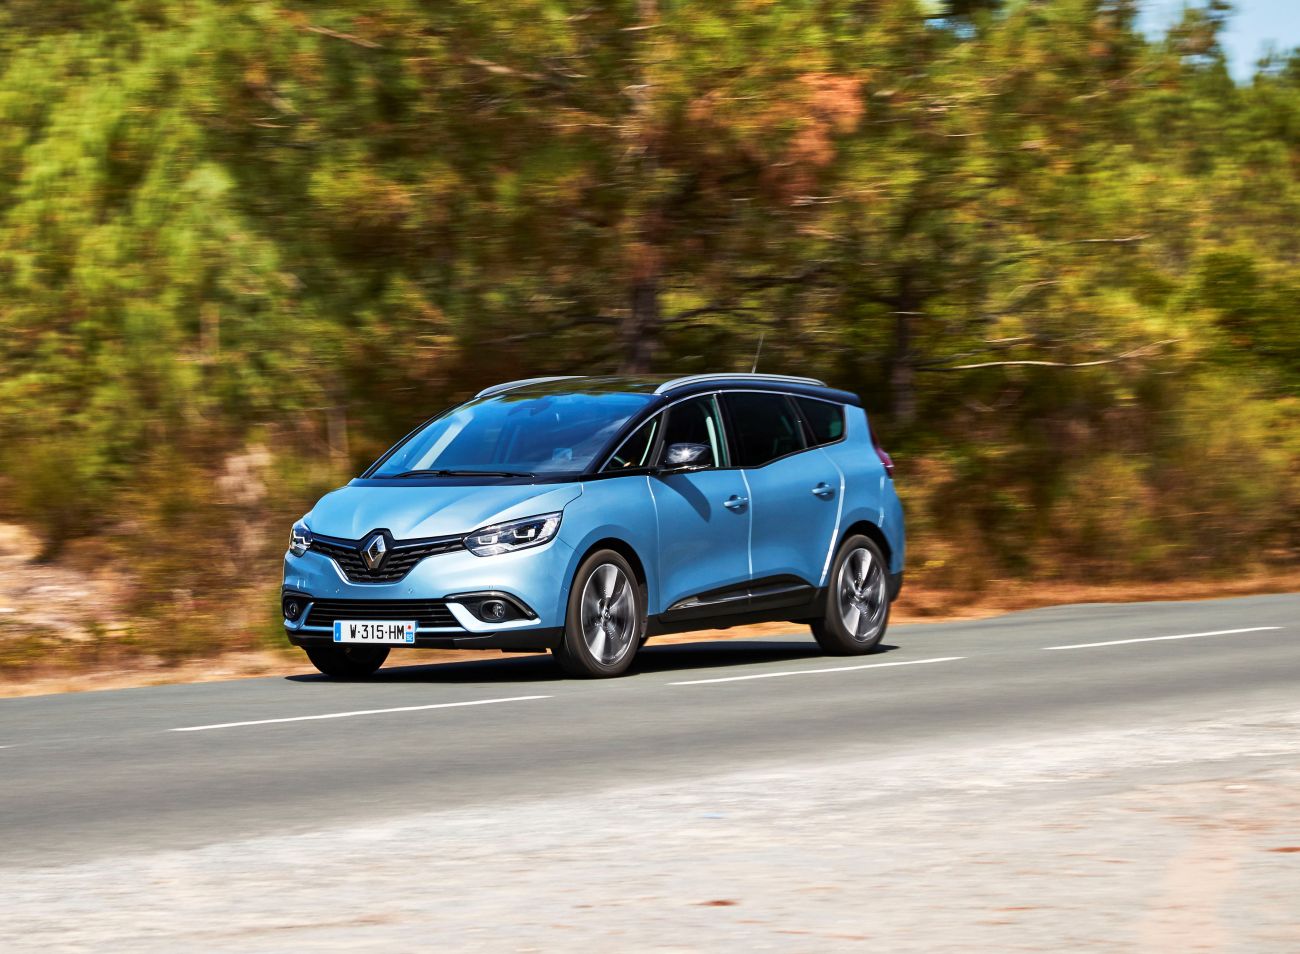 81456_2016_Drive_tests_New_Renault_GRAND_SCENIC_in_the_Bordeaux_region